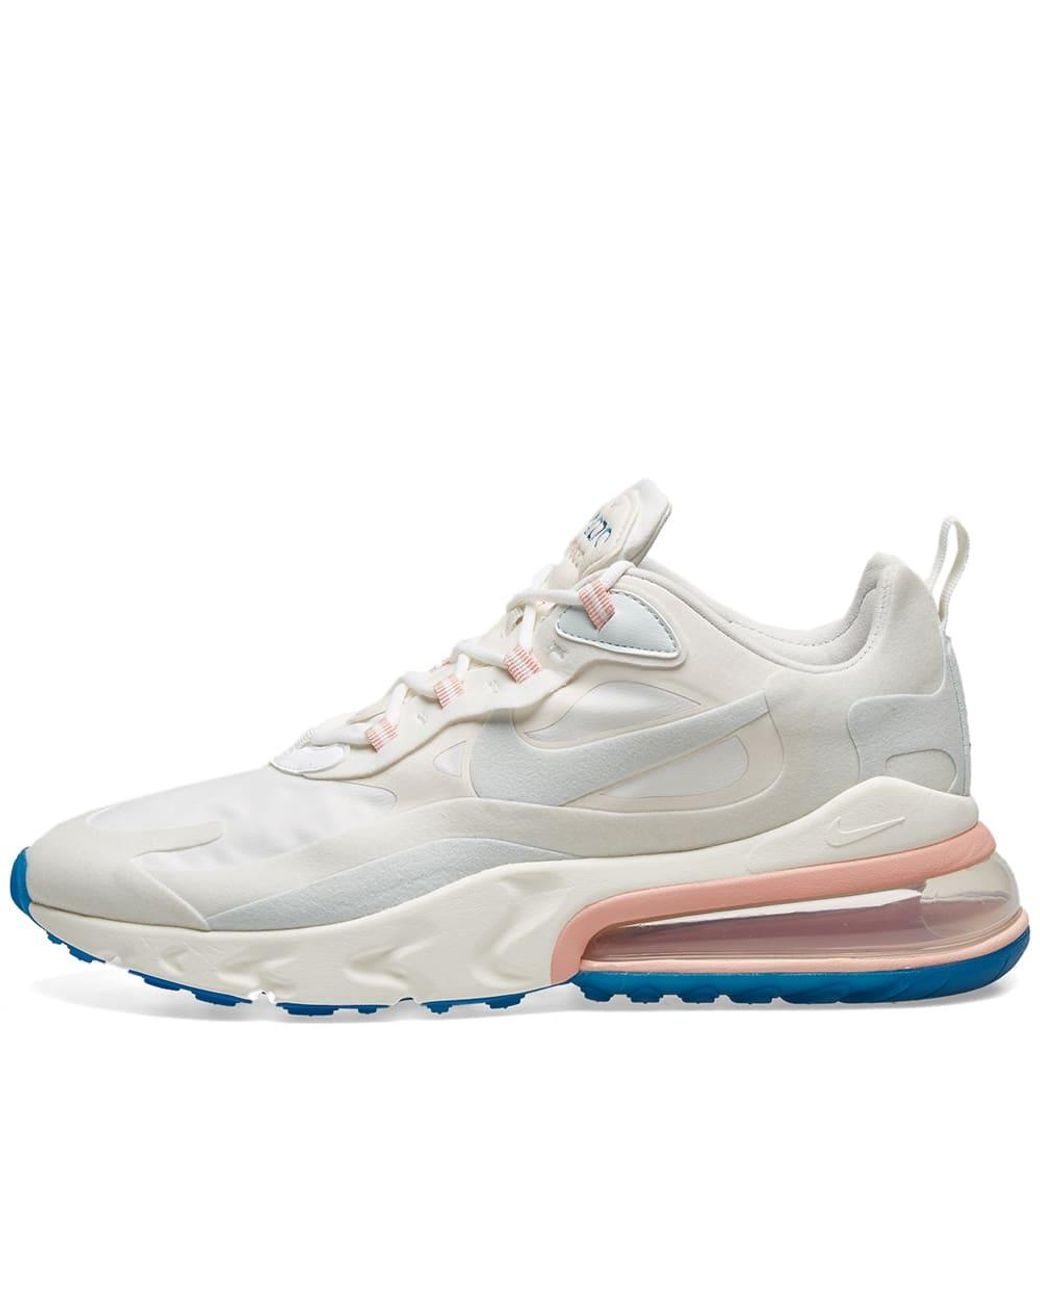 Nike Rubber Air Max 270 React Shoes in White | Lyst Canada